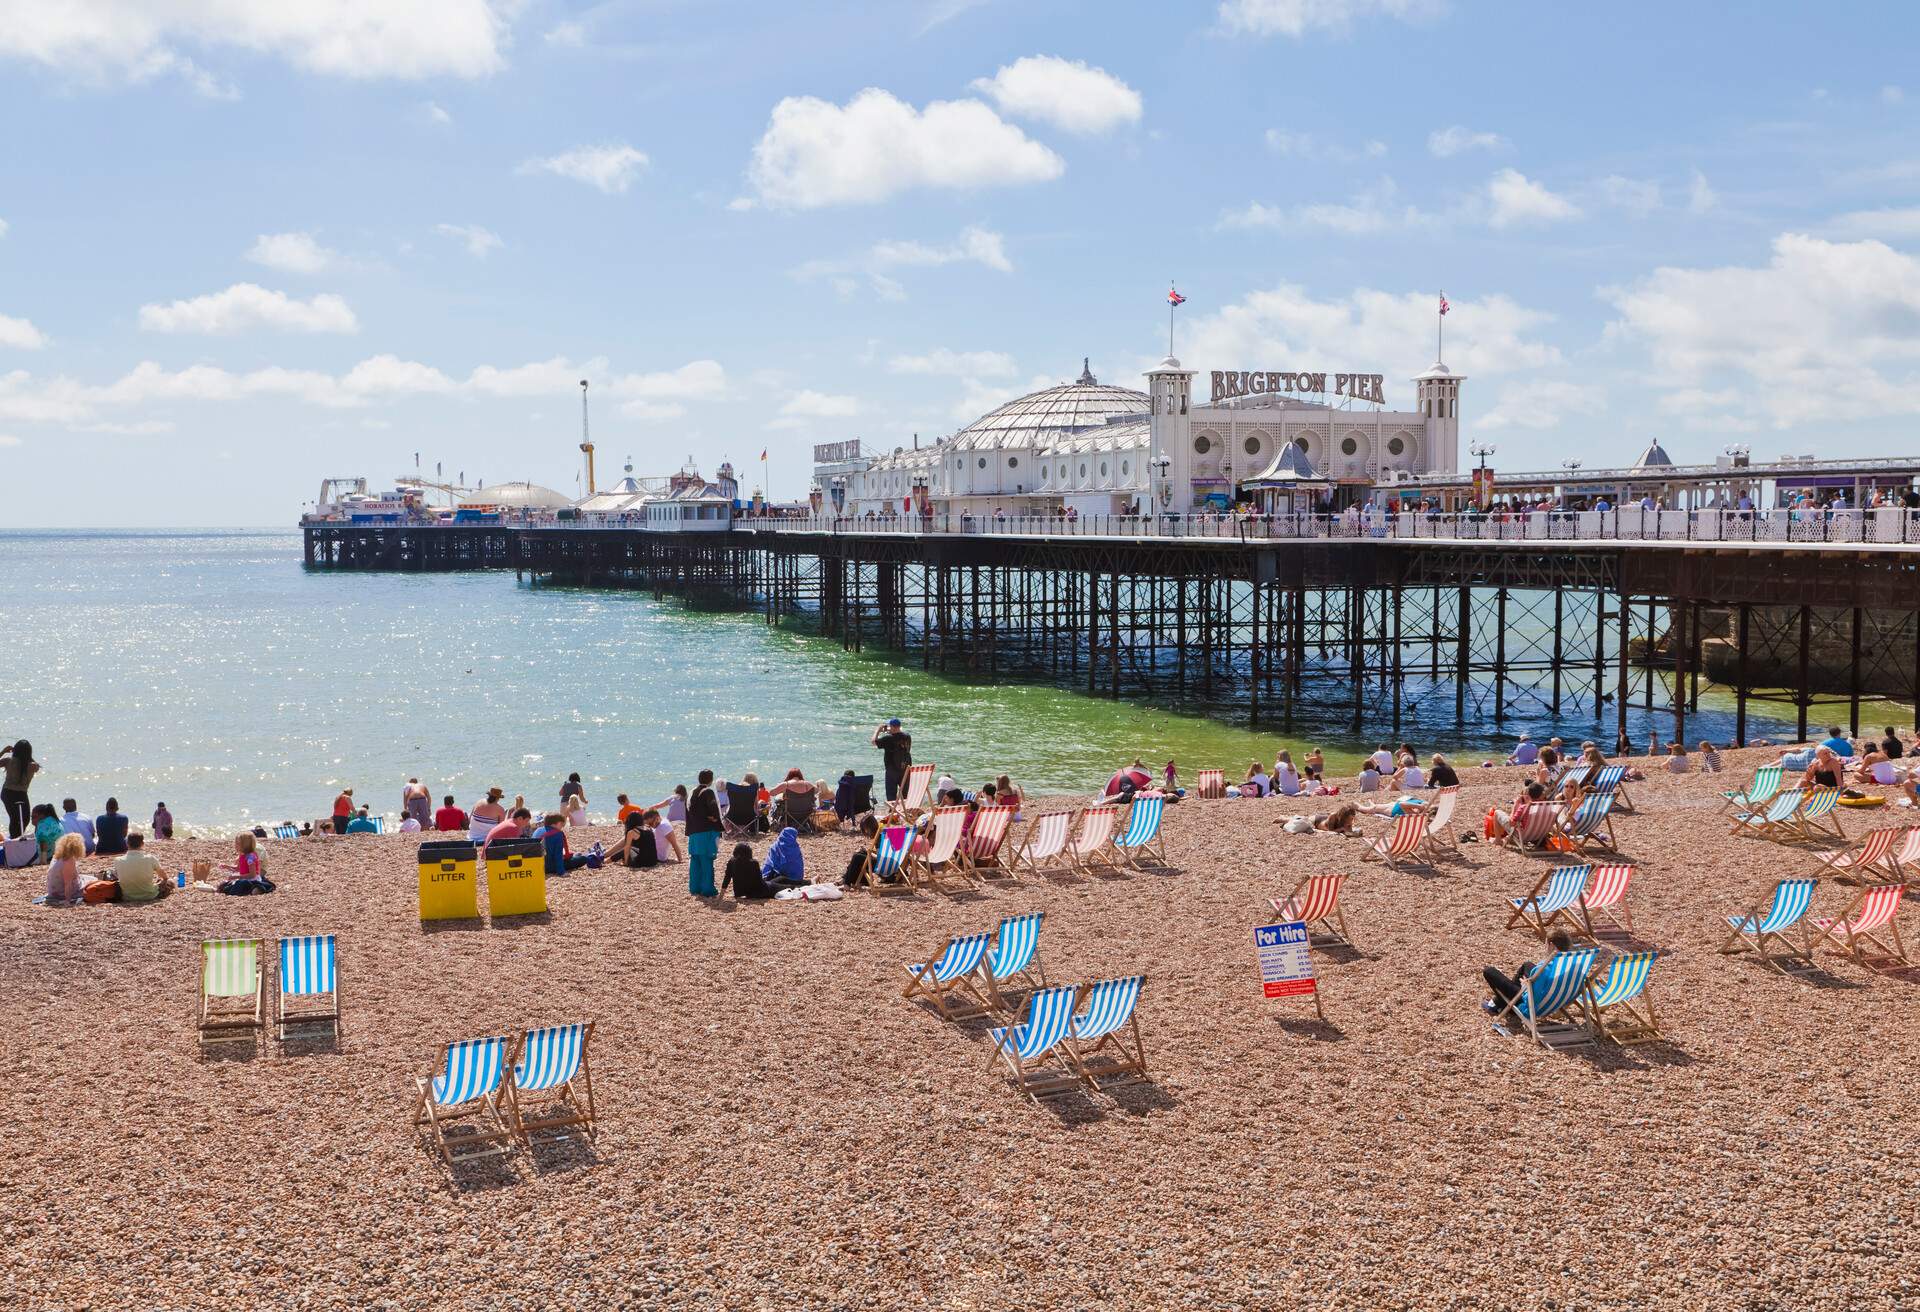 People hanging out on the pebbly beach at Brighton Pier.